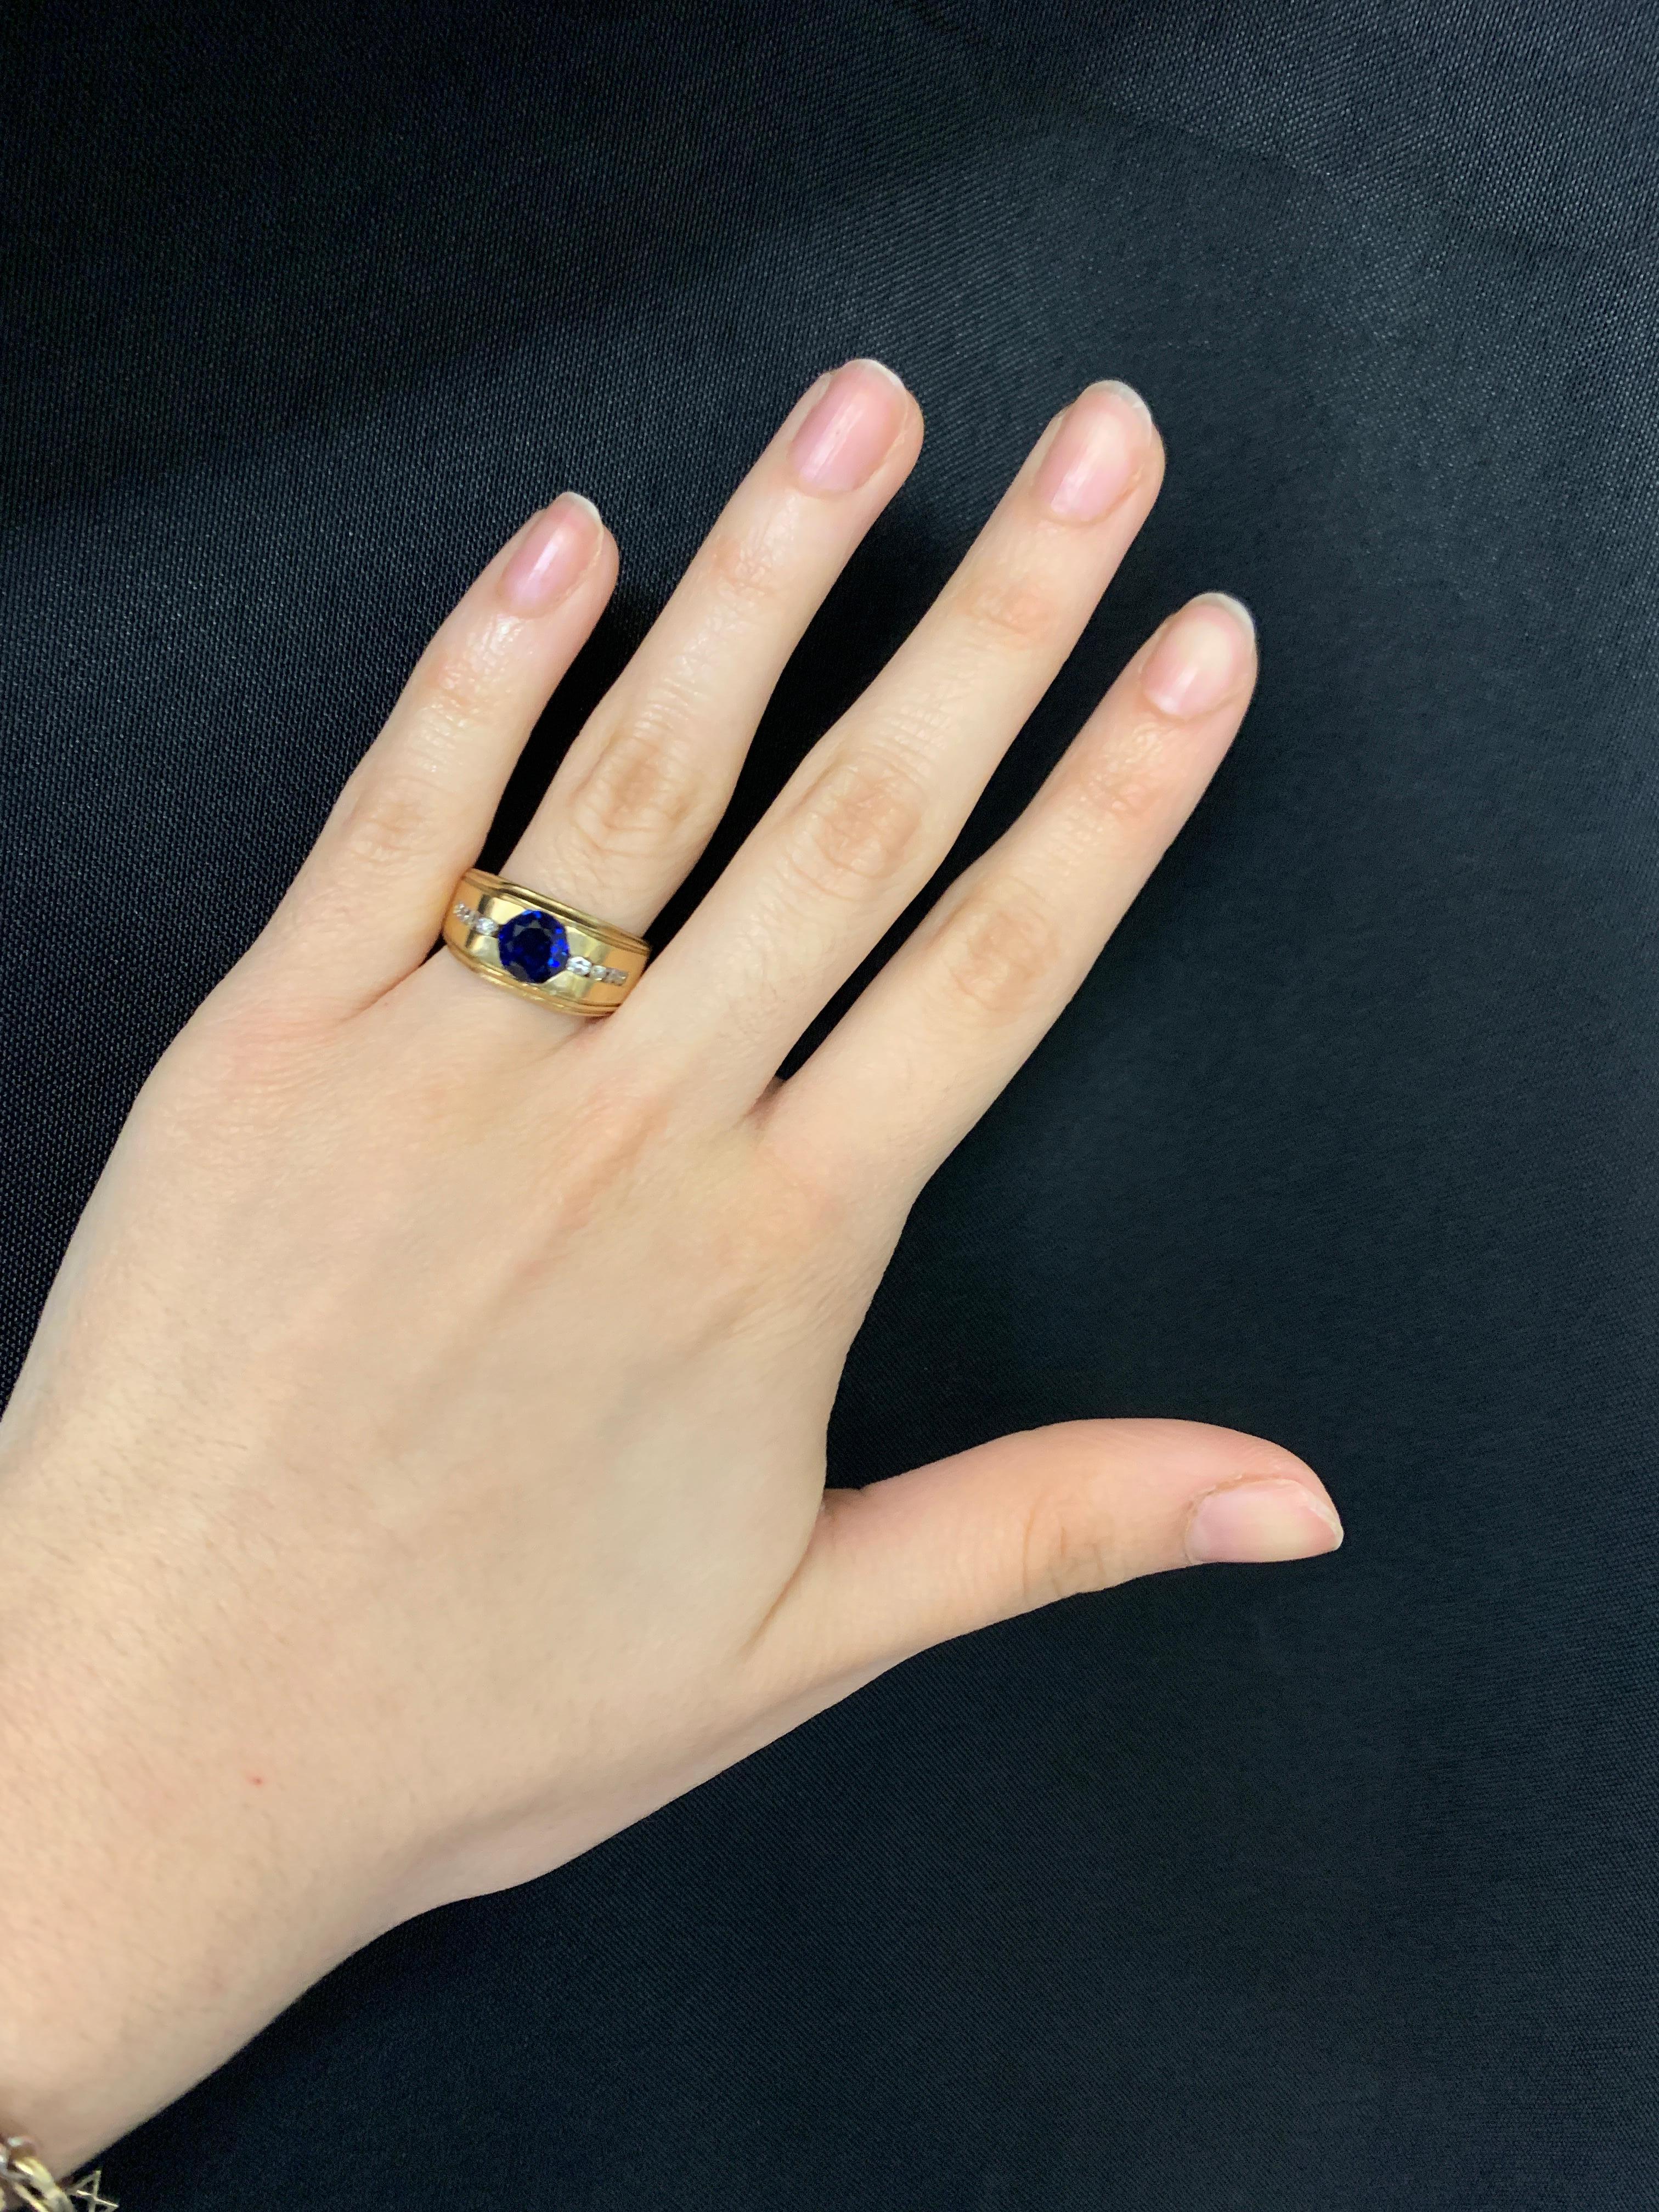 Men's Sapphire Ring

Beautiful yellow gold ring featuring a round center sapphire and four round cut diamonds on each side.  

Metal type: 14 Karat Yellow Gold
Approximate Sapphire Weight: 1 Carat
Ring Size: 7
Resizable free of charge 
